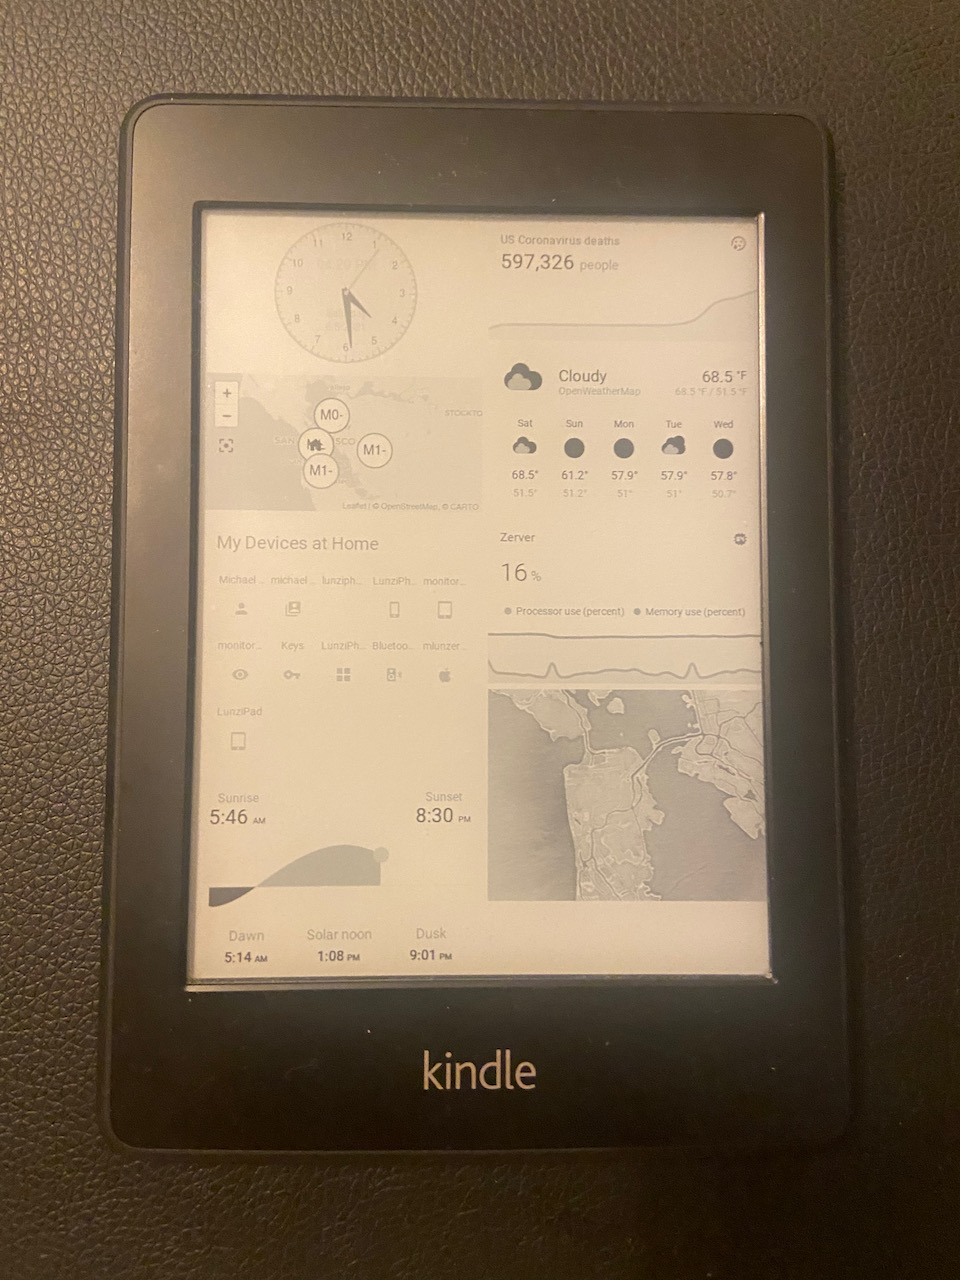 Kindle Home Assistant Dashboard Finished